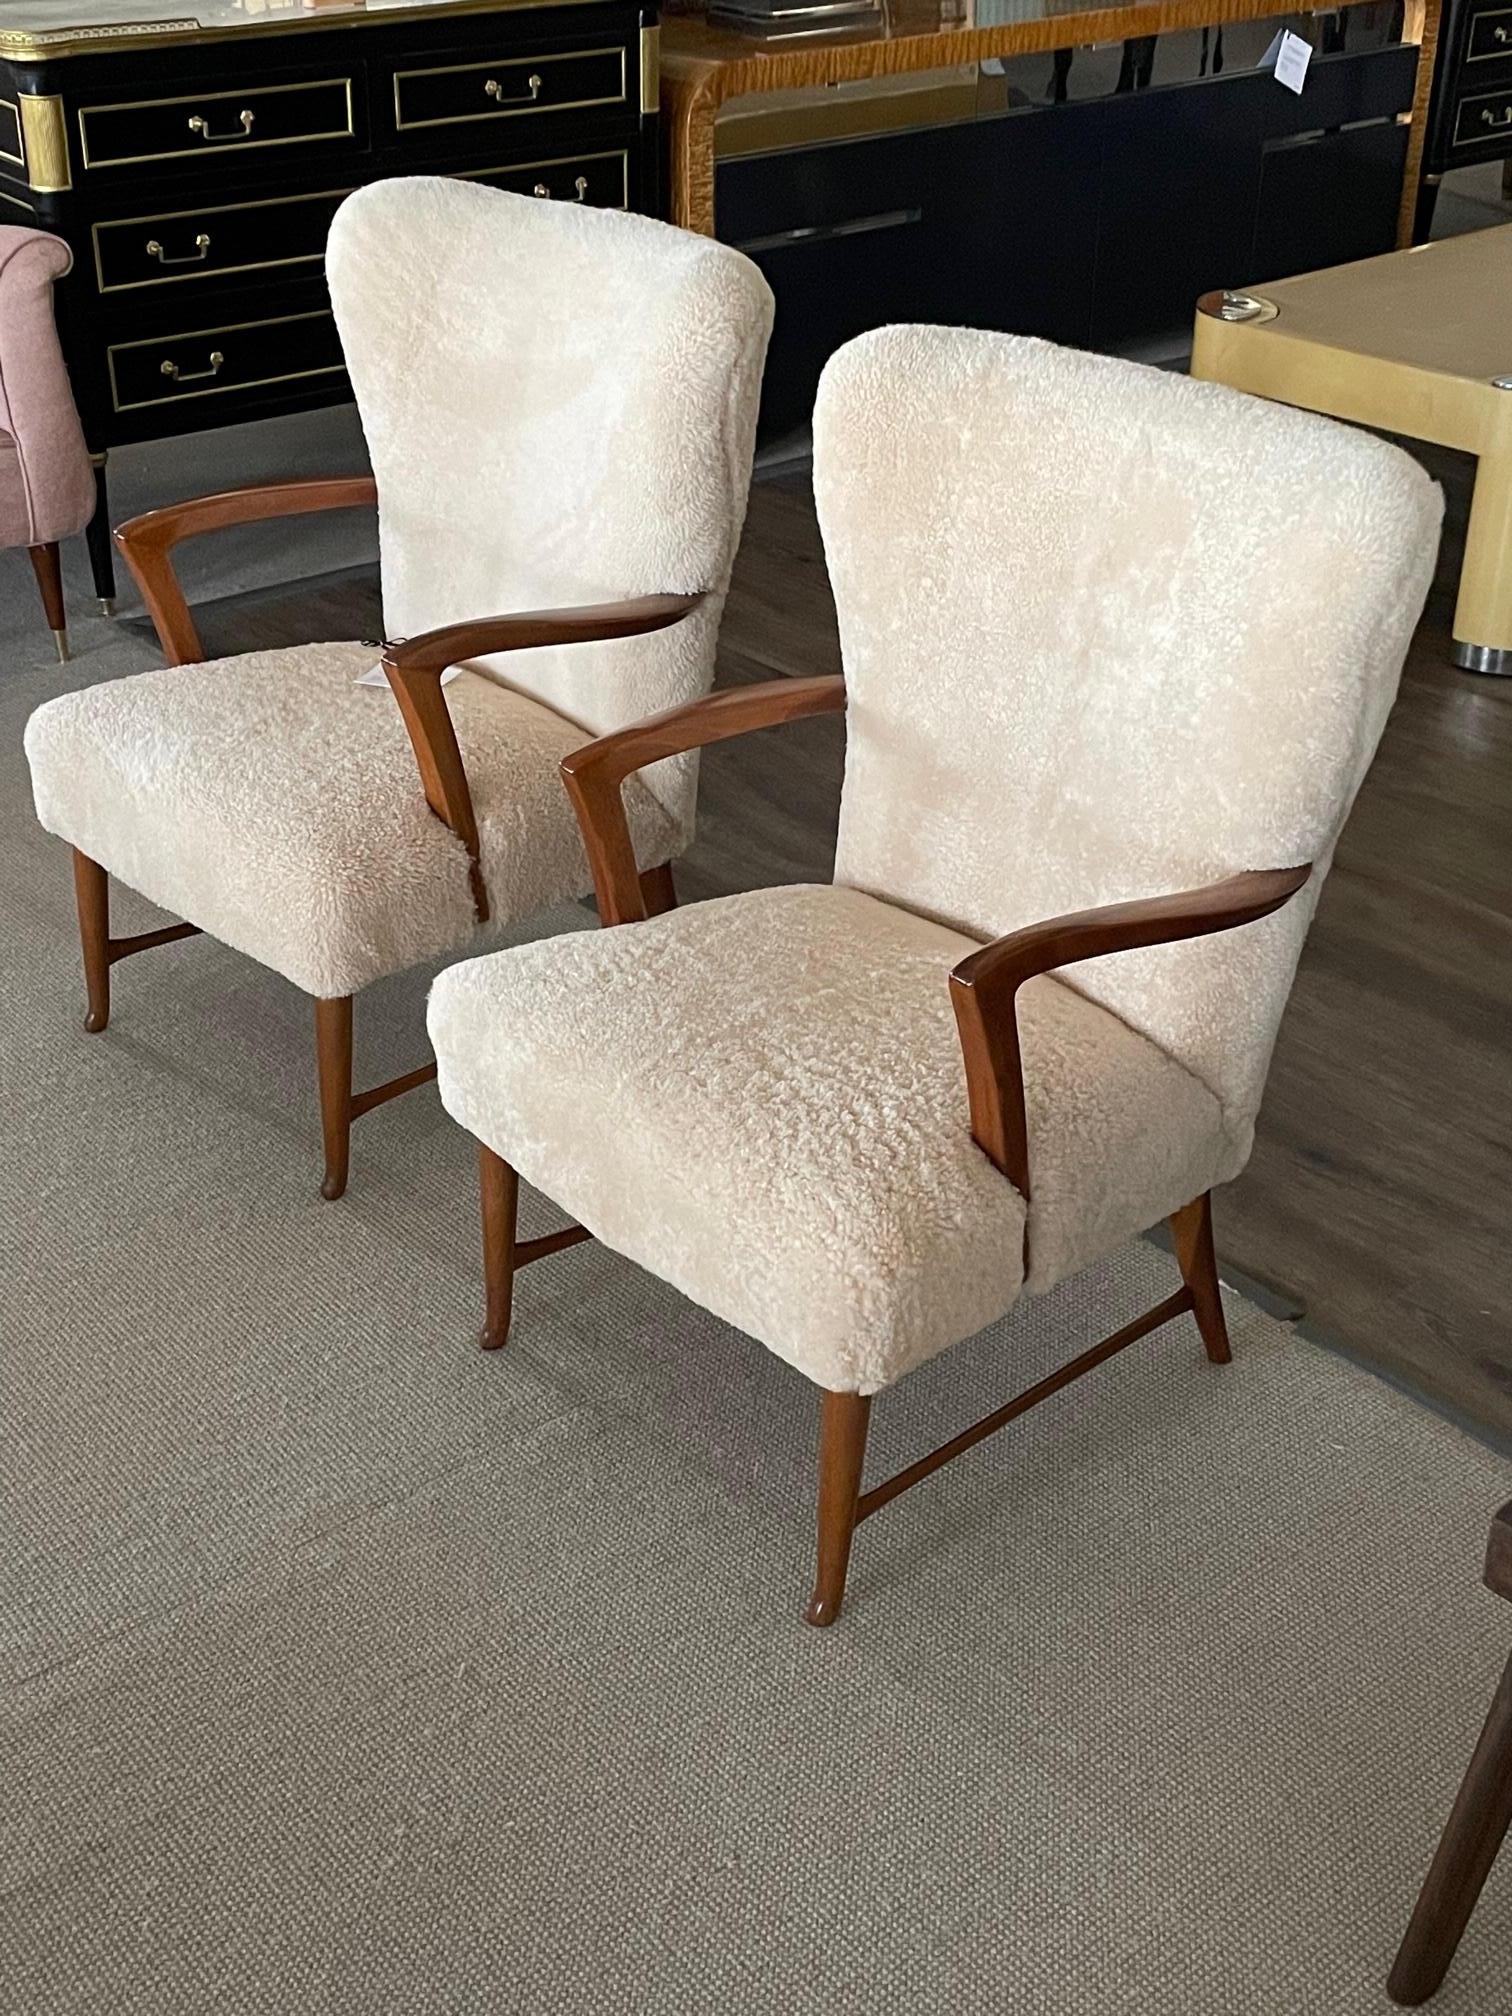 Pair of Mid-Century Paola Buffa Style Italian Lounge Chairs in Neutral Sheepskin

Pair of modernist Italian designer lounge chairs. Having an organic form in a genuine neutral sheepskin. 
Attributed to Paola Buffa, 20th century Italian architect and